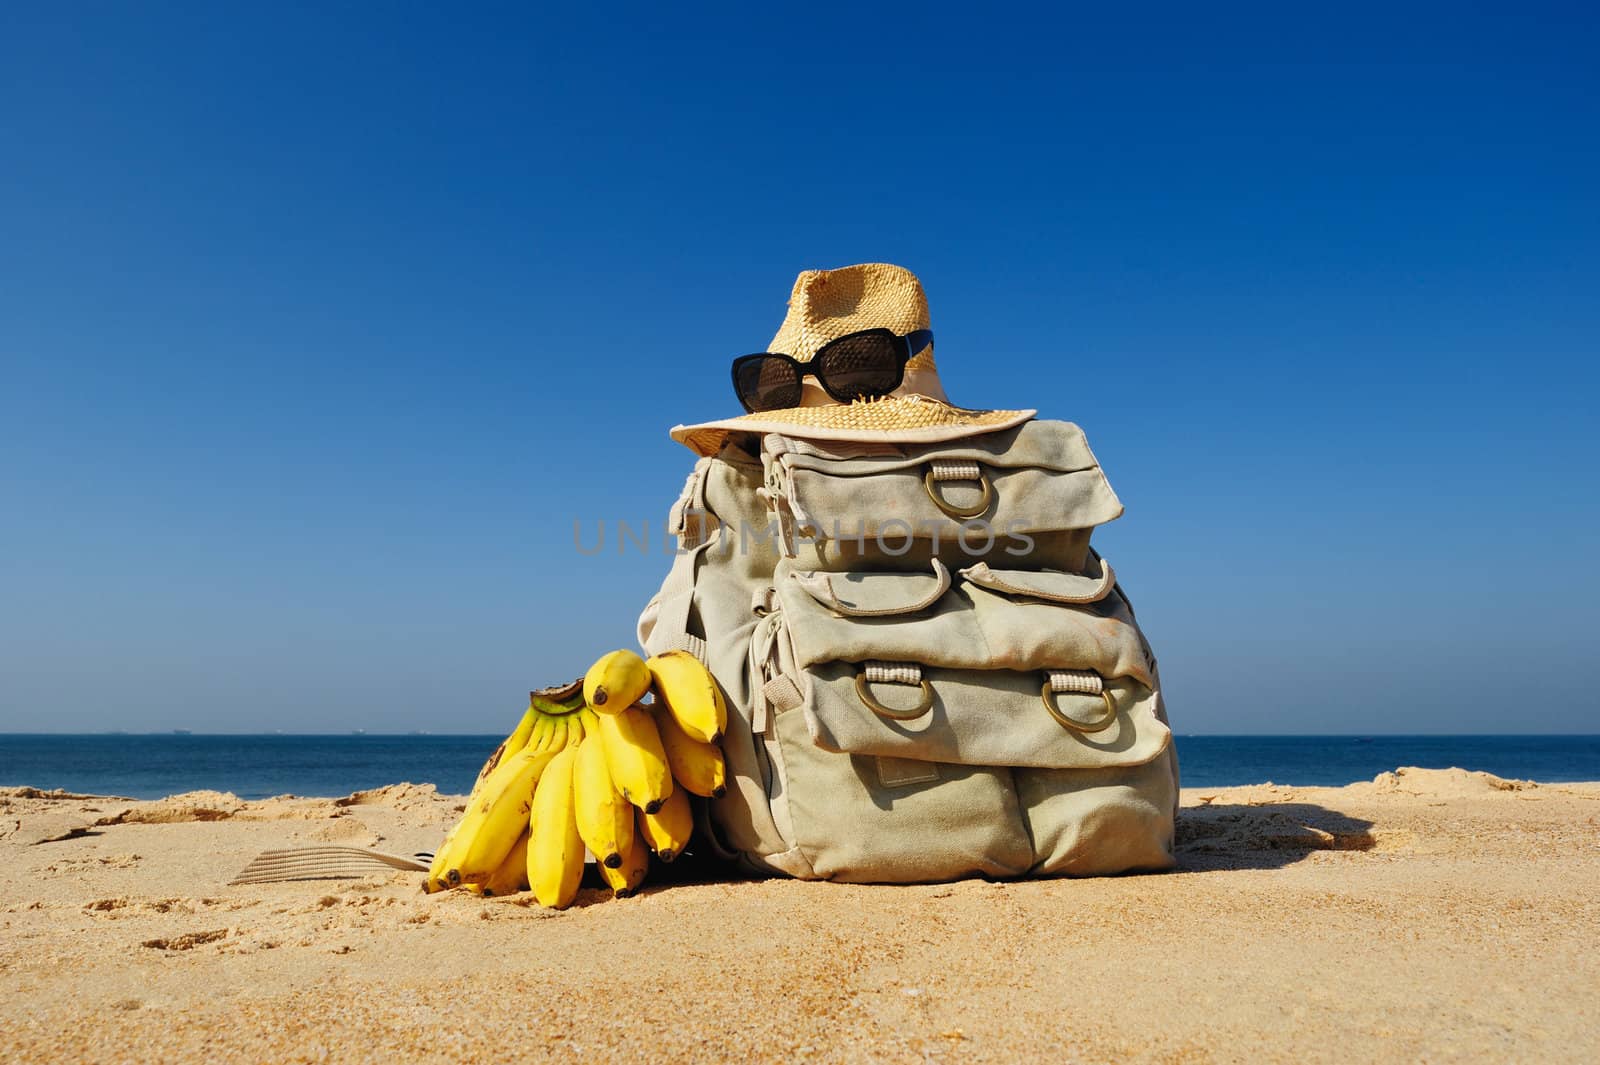 Rucksack, hat and bananas on the sandy beach